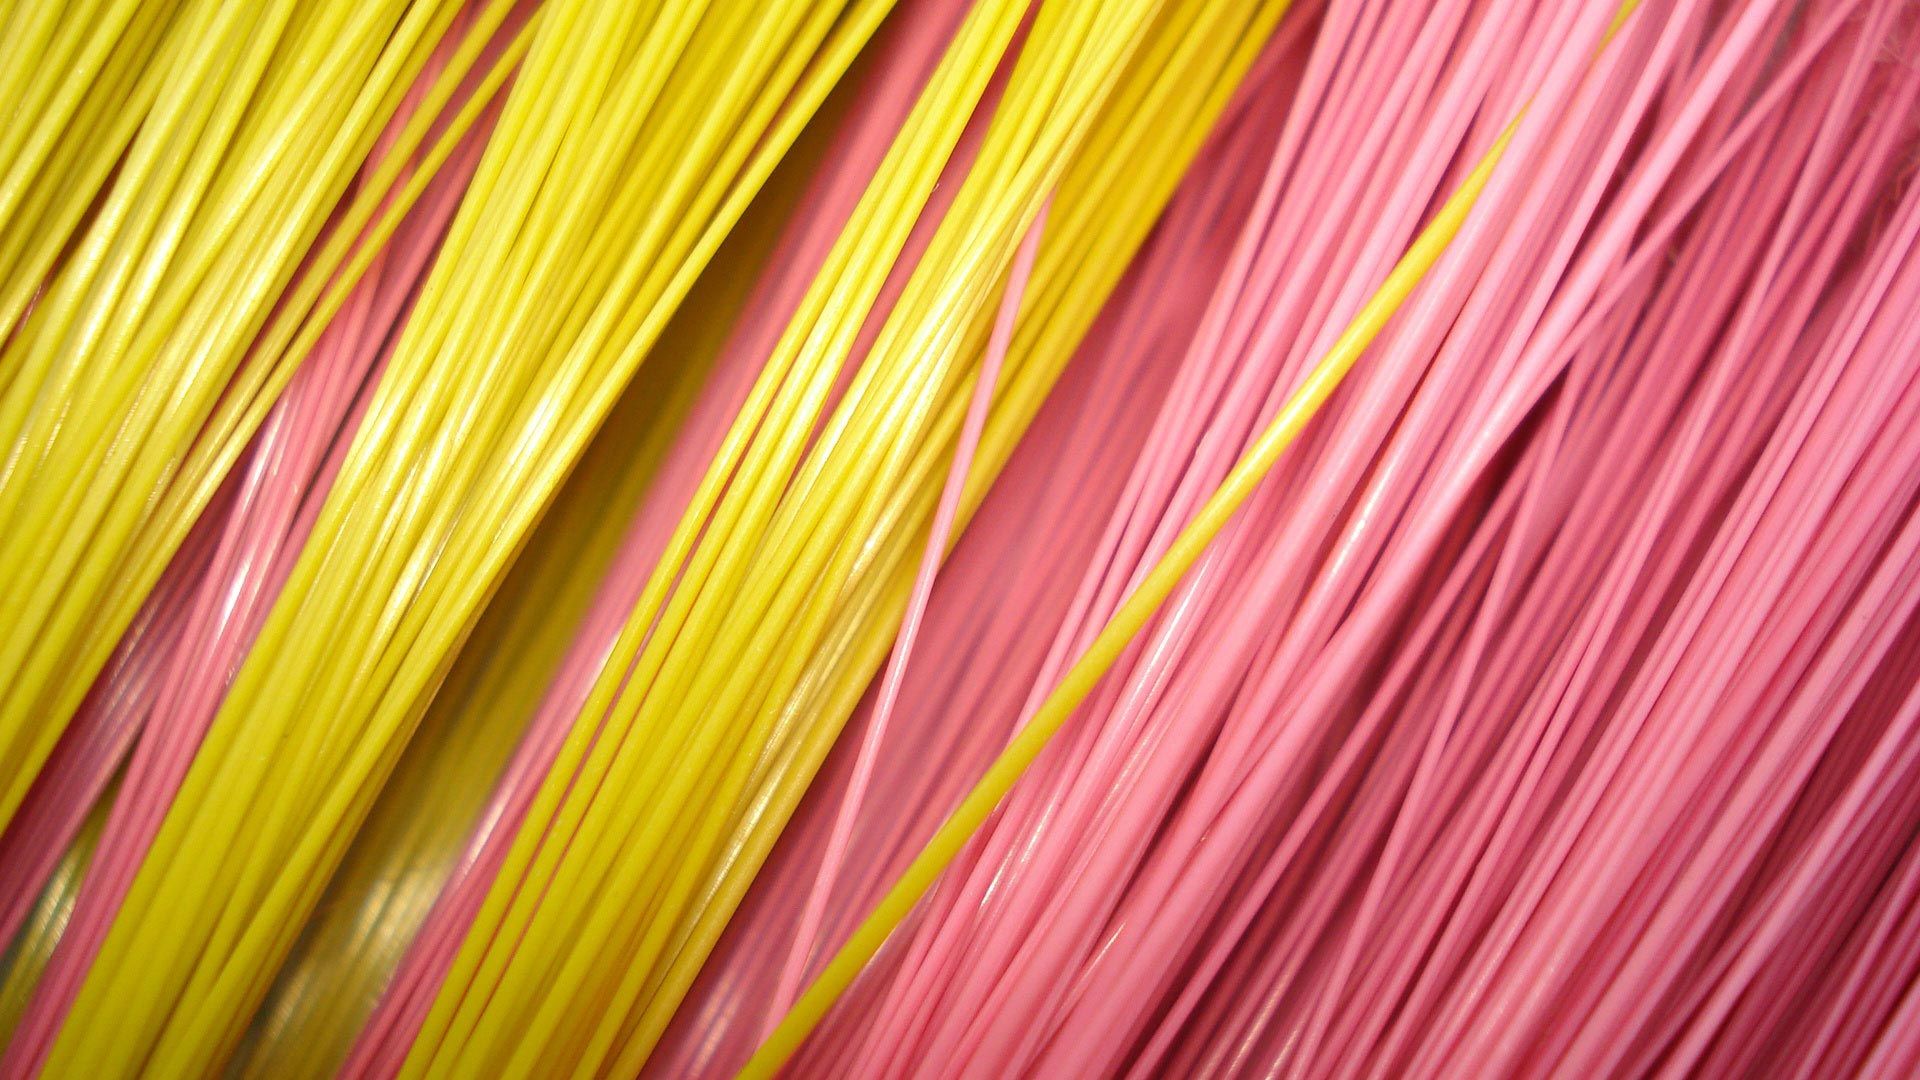 Wires 4K wallpaper for your desktop or mobile screen free and easy to download